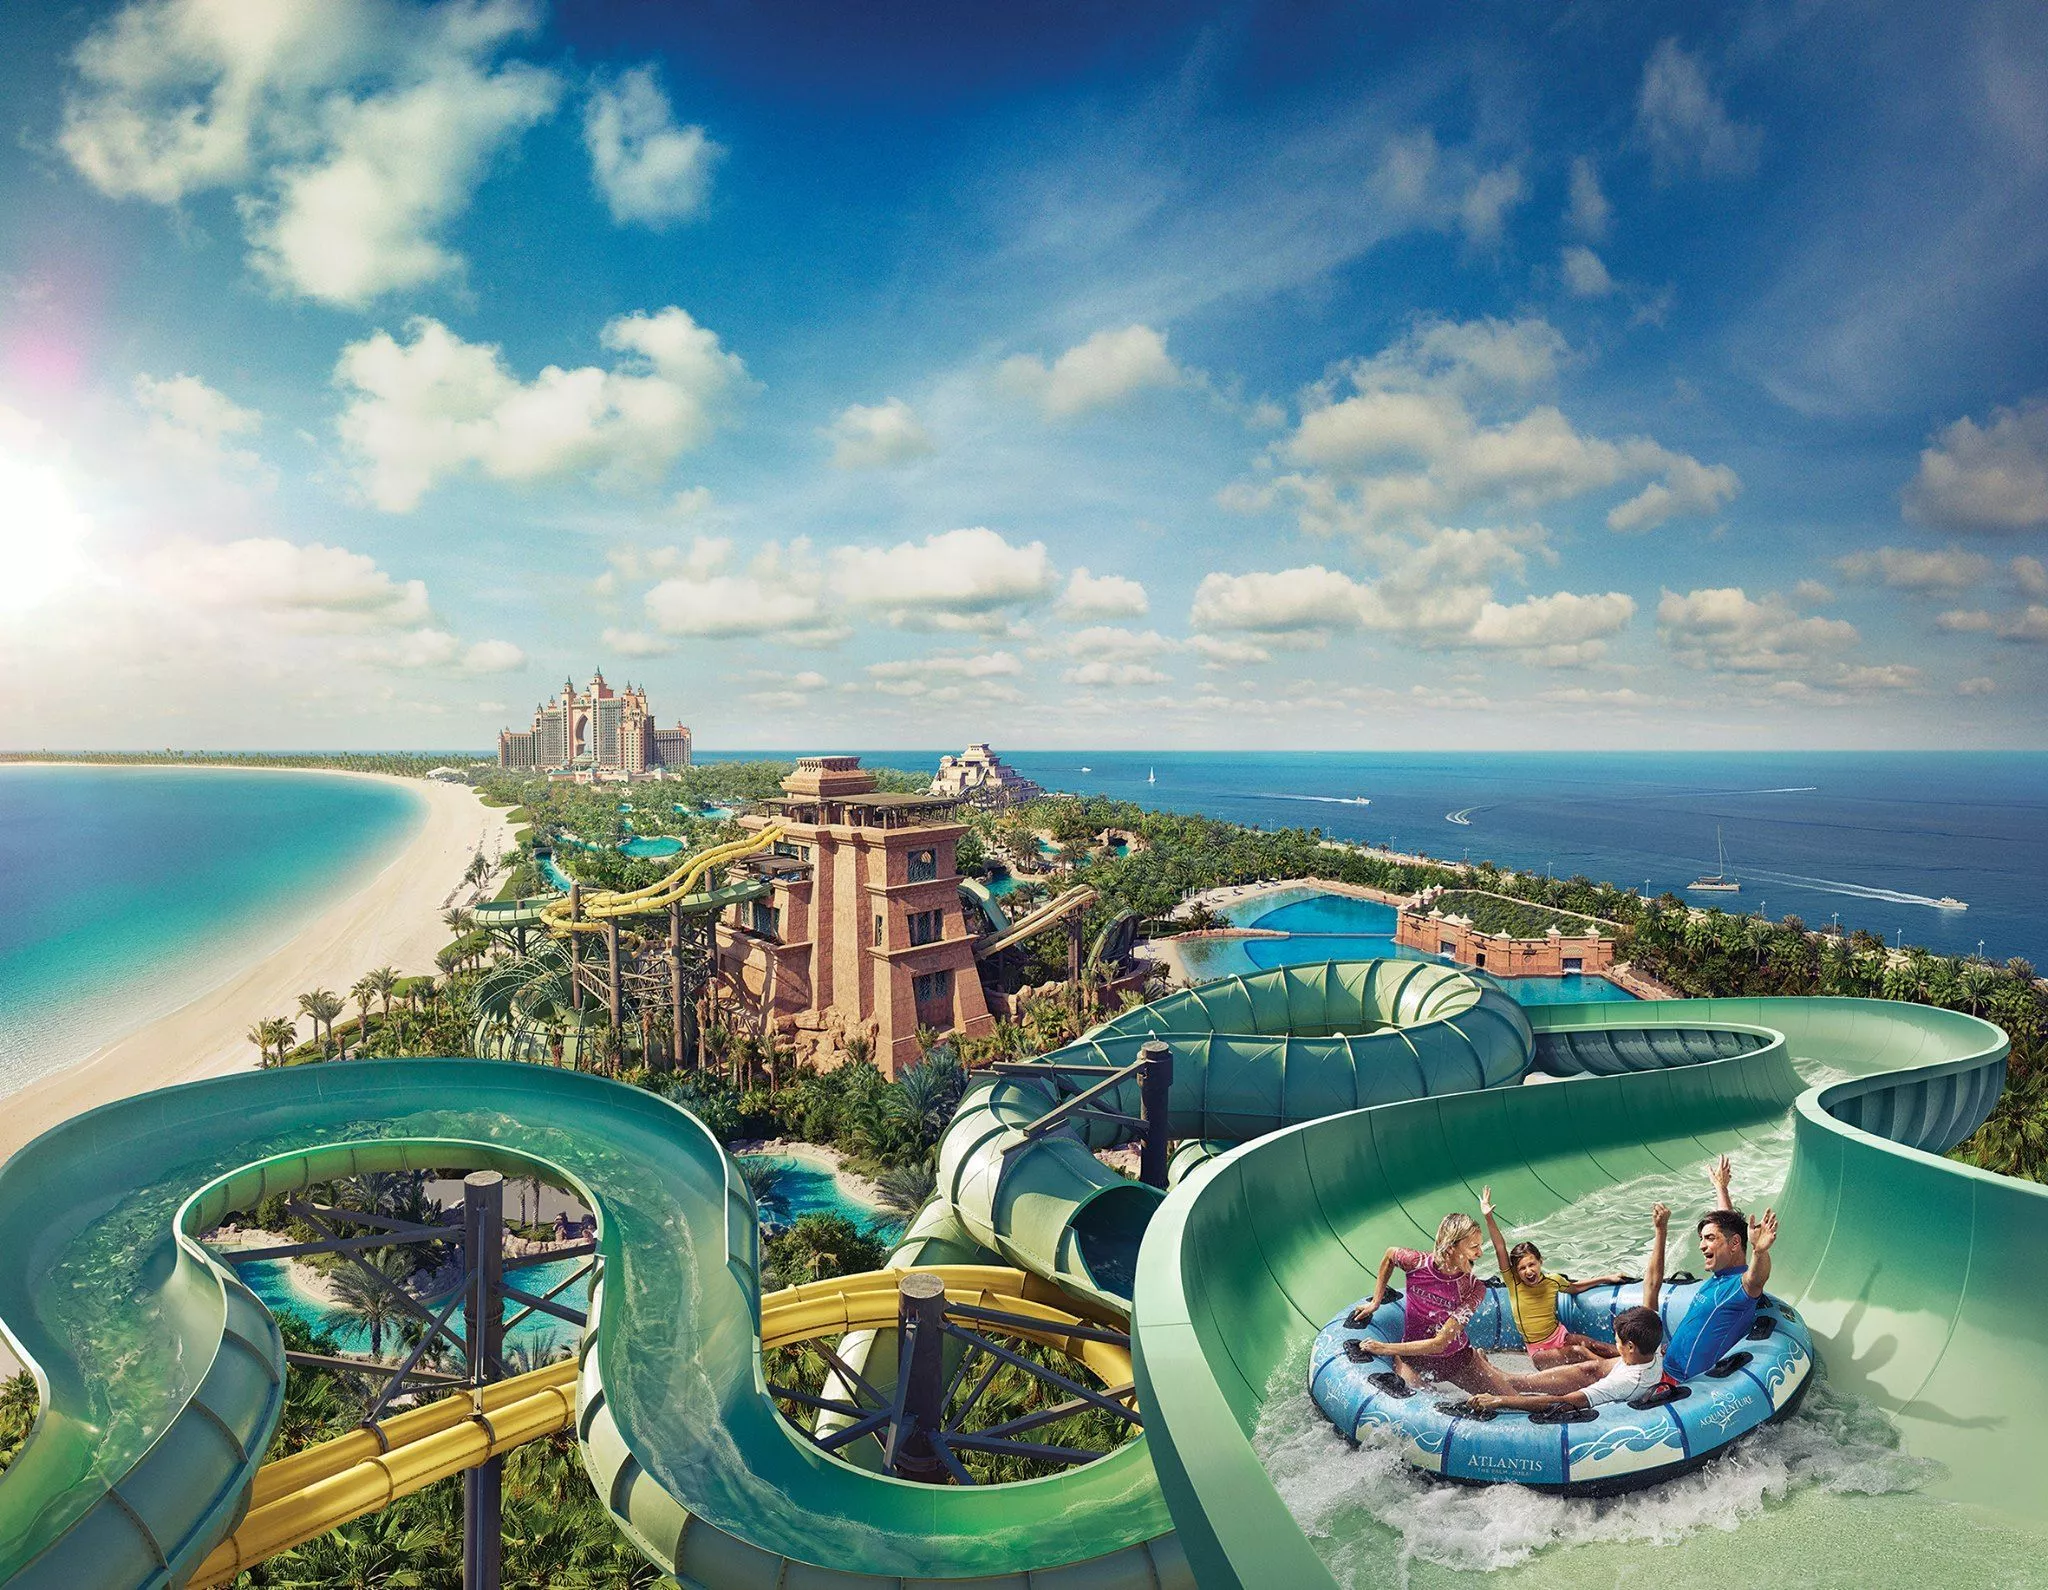 Aquaventuras Park in Mexico, North America | Water Parks - Rated 3.7